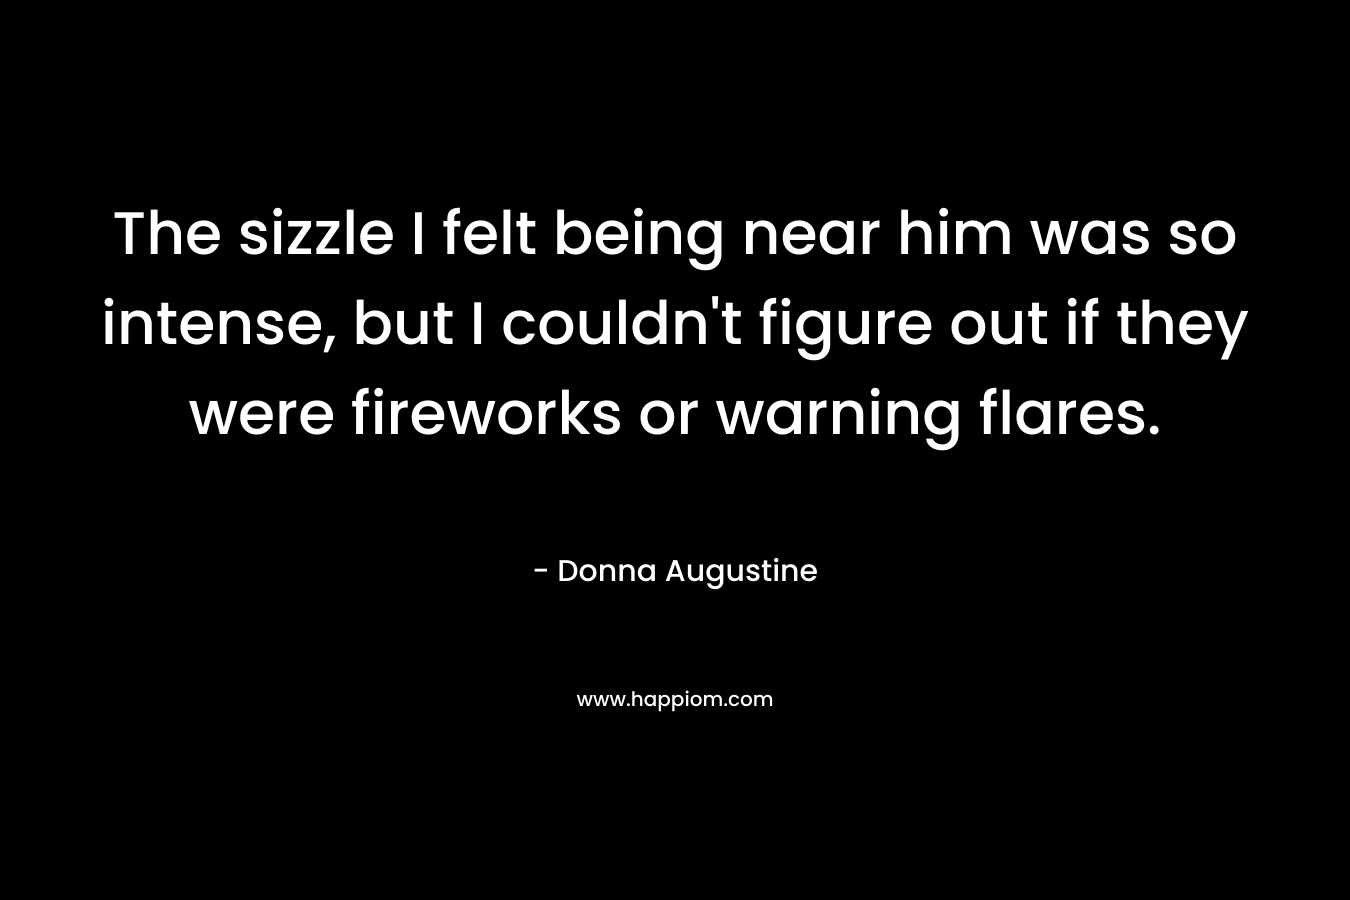 The sizzle I felt being near him was so intense, but I couldn’t figure out if they were fireworks or warning flares. – Donna Augustine